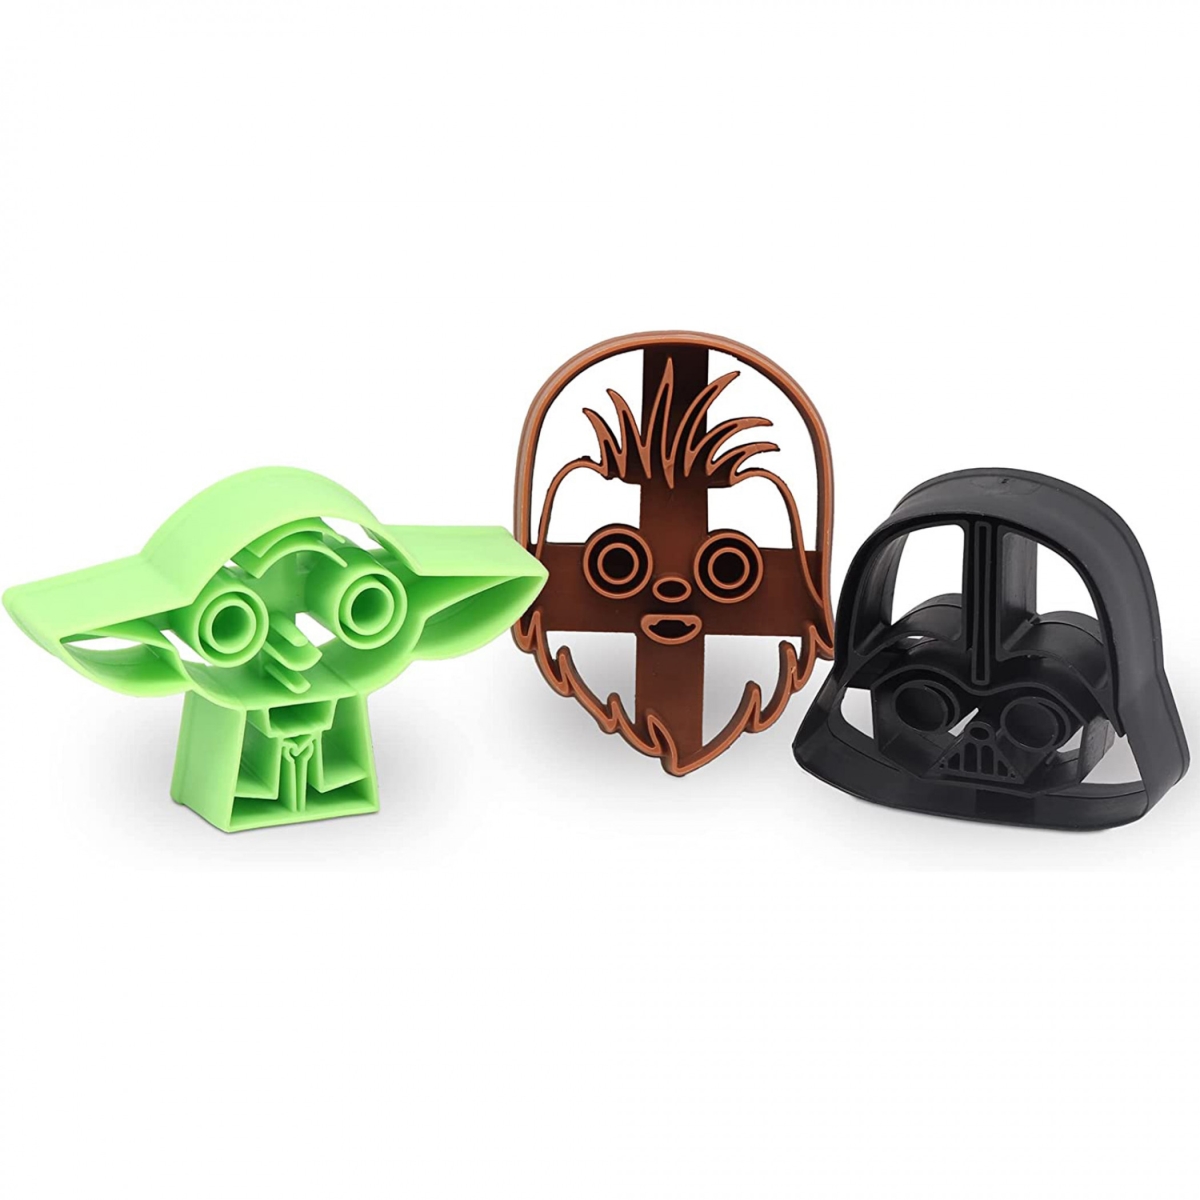 Picture of Star Wars 854475 Characters Cookie Cutter Set, Multi Color